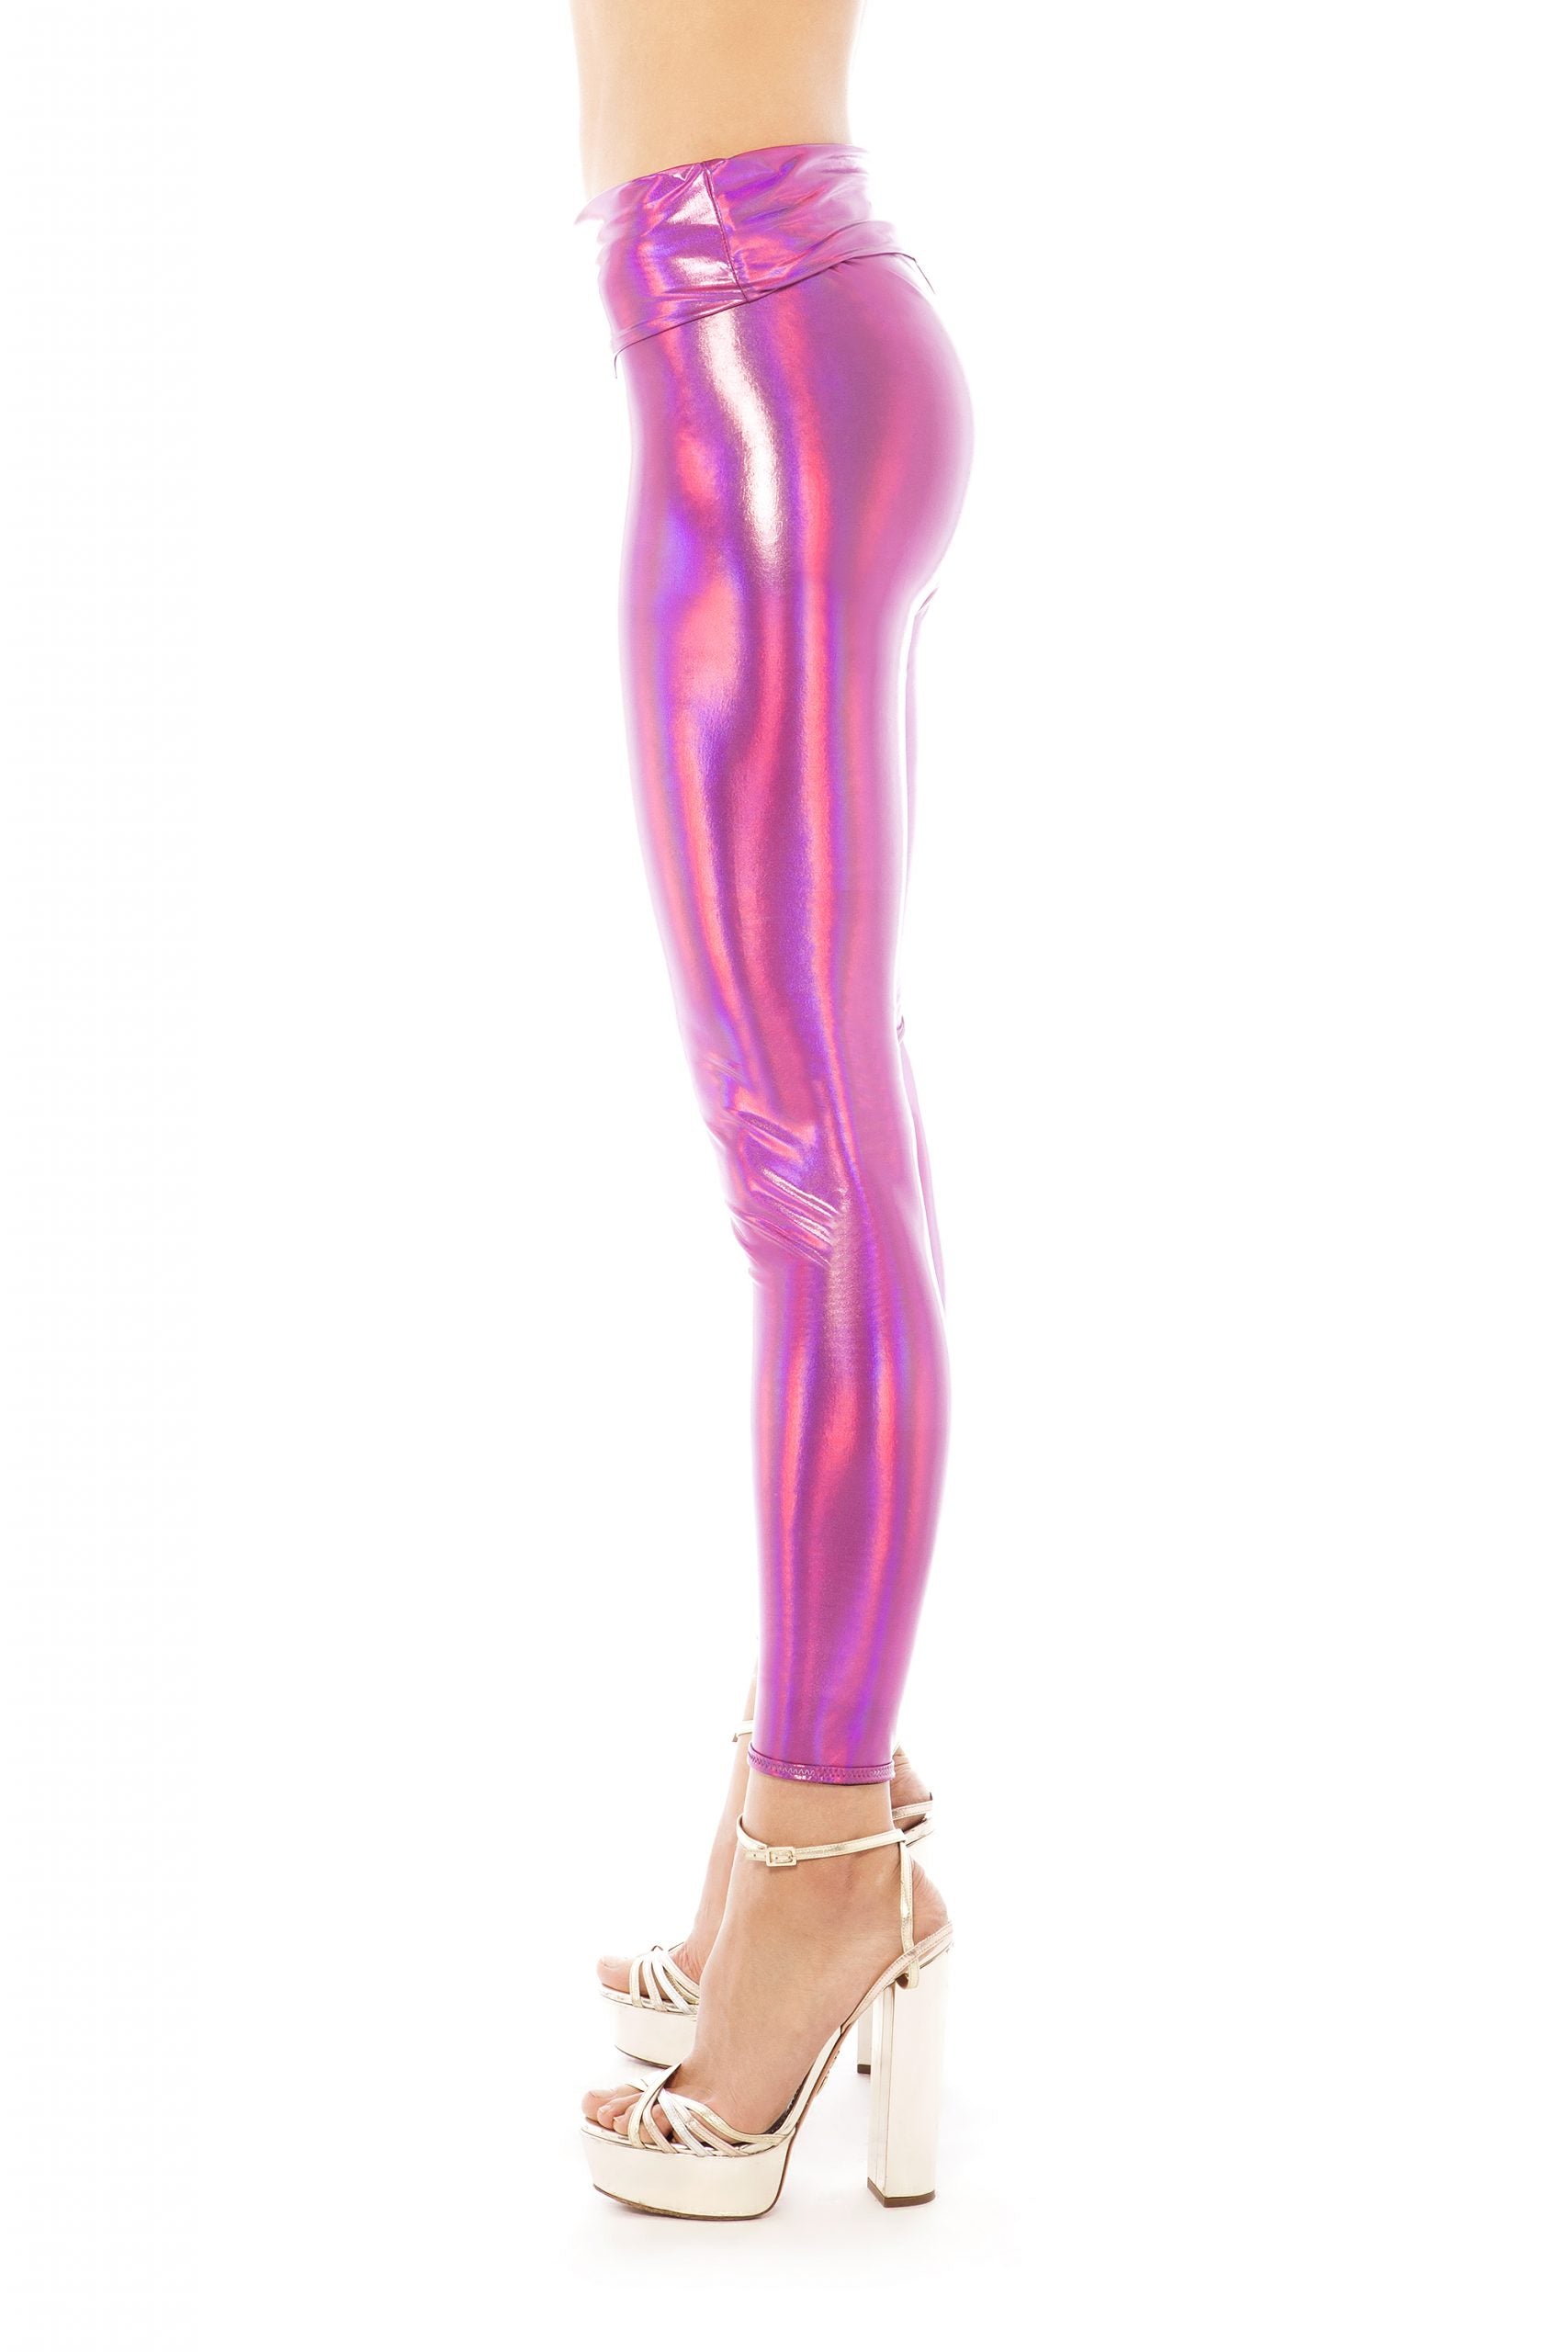 Iridescent Pink Leggings by Wild Love Clothing